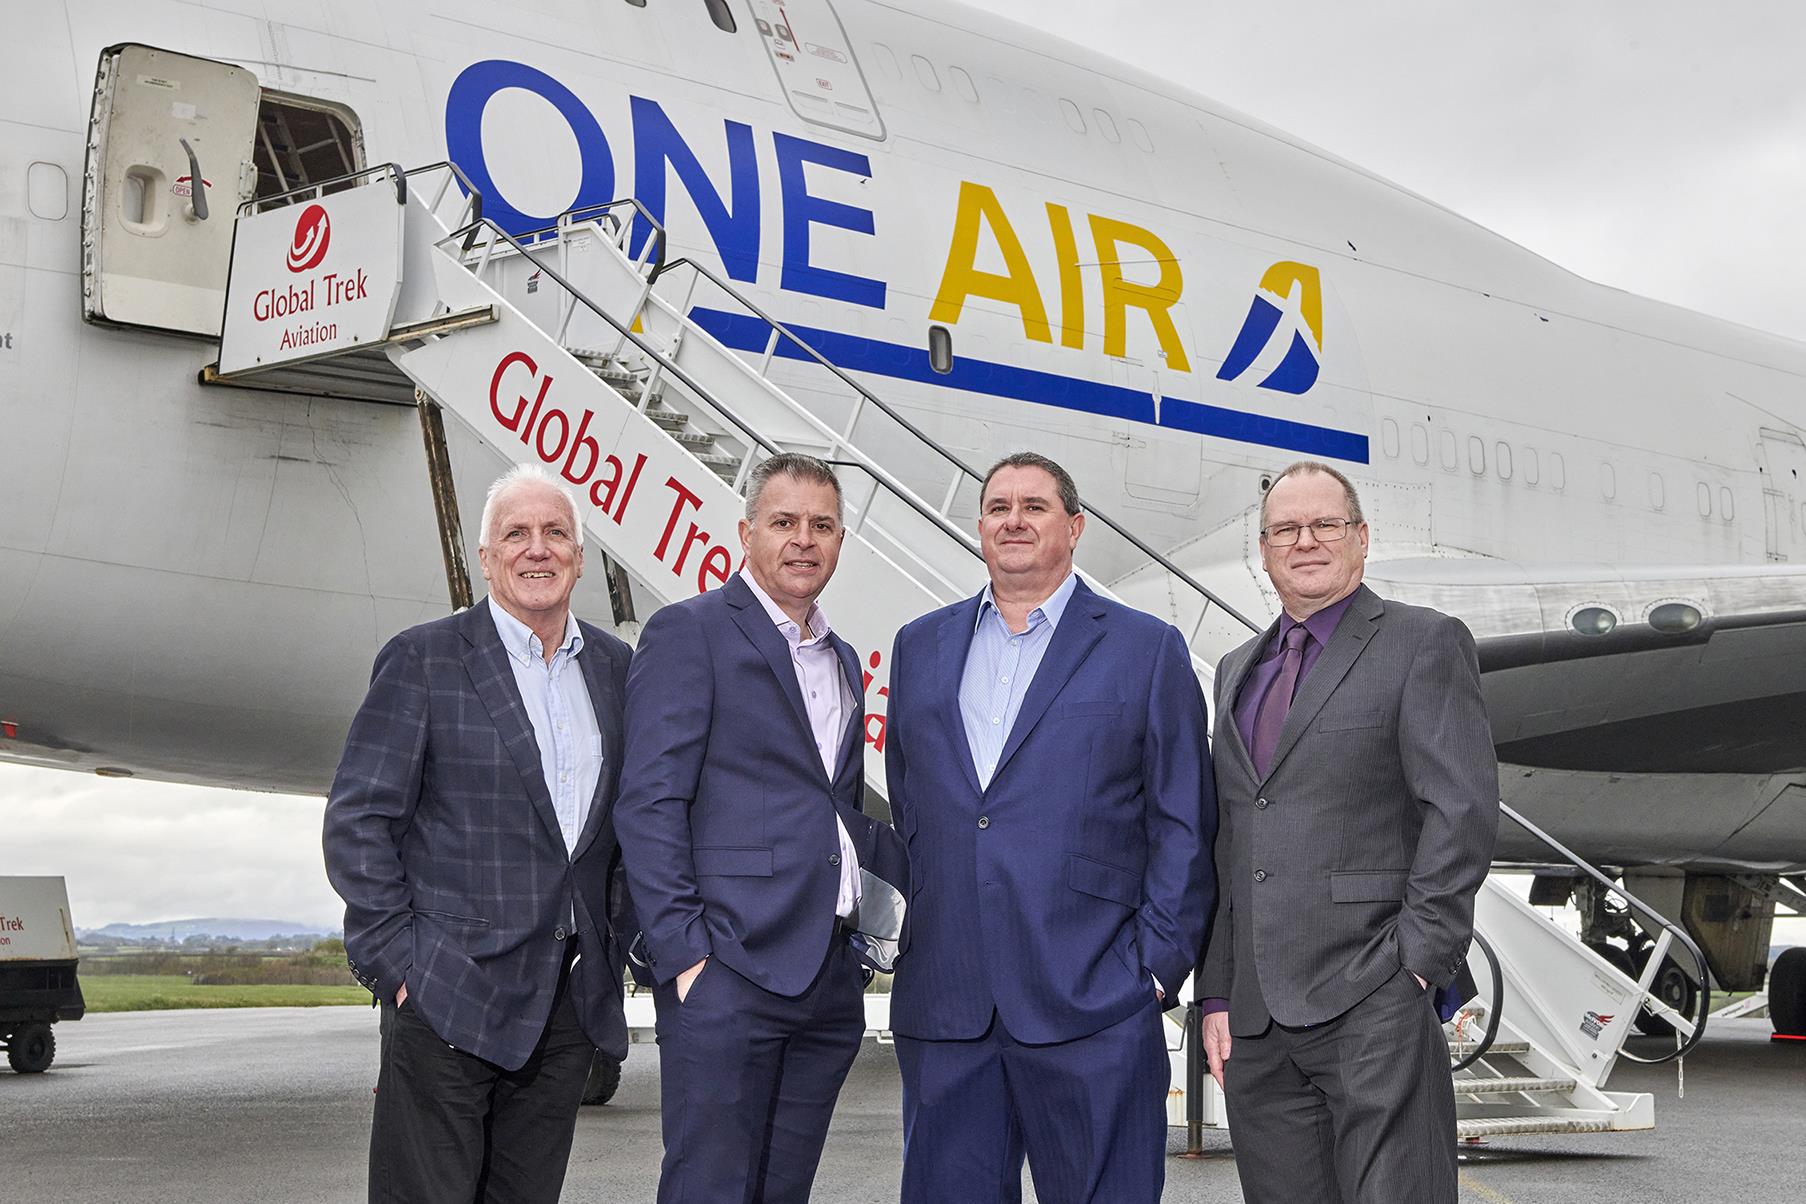 Self Photos / Files - David Tattersall, Chief Technical Officer, Chris Hope, Chief Operating Officer, Paul Bennett, CEO, and Jon Hartley, Chief Financial Officer, of One Air